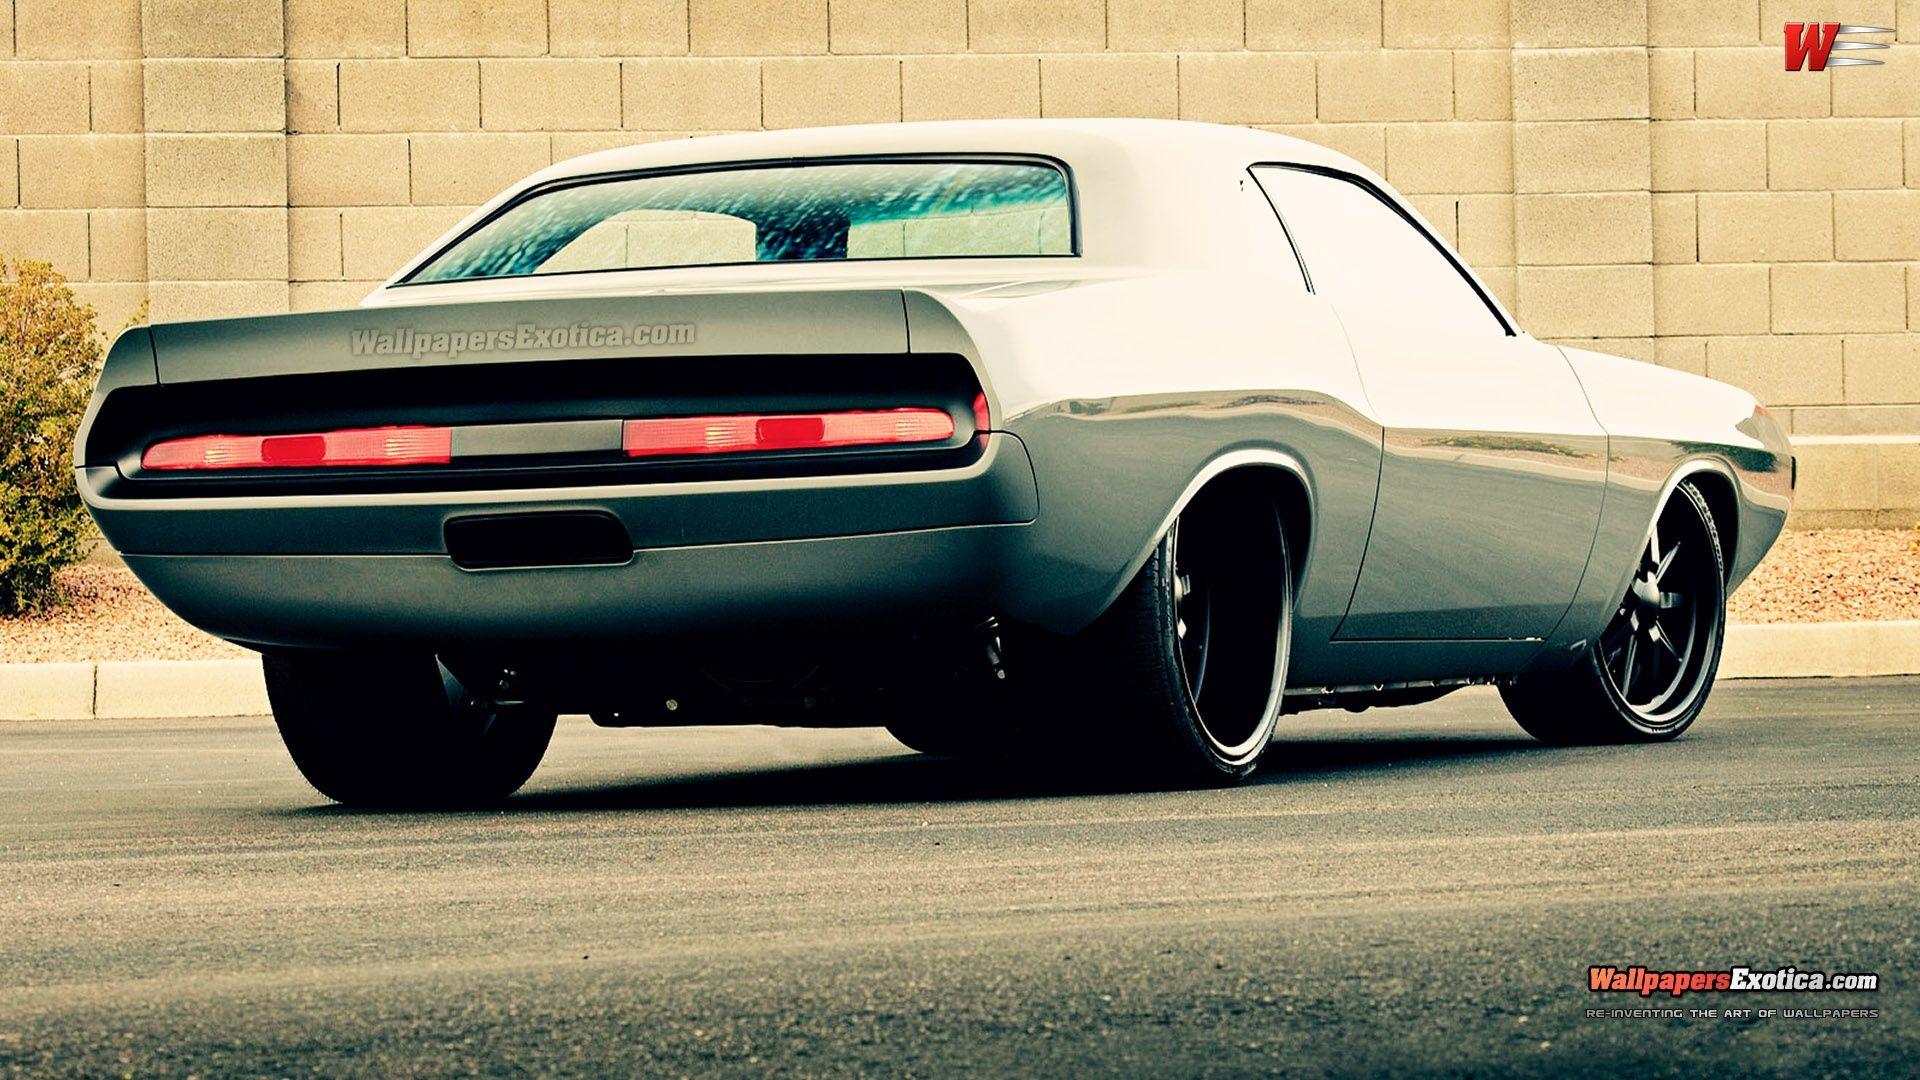 ) Dodge Muscle Car Wallpapers HD